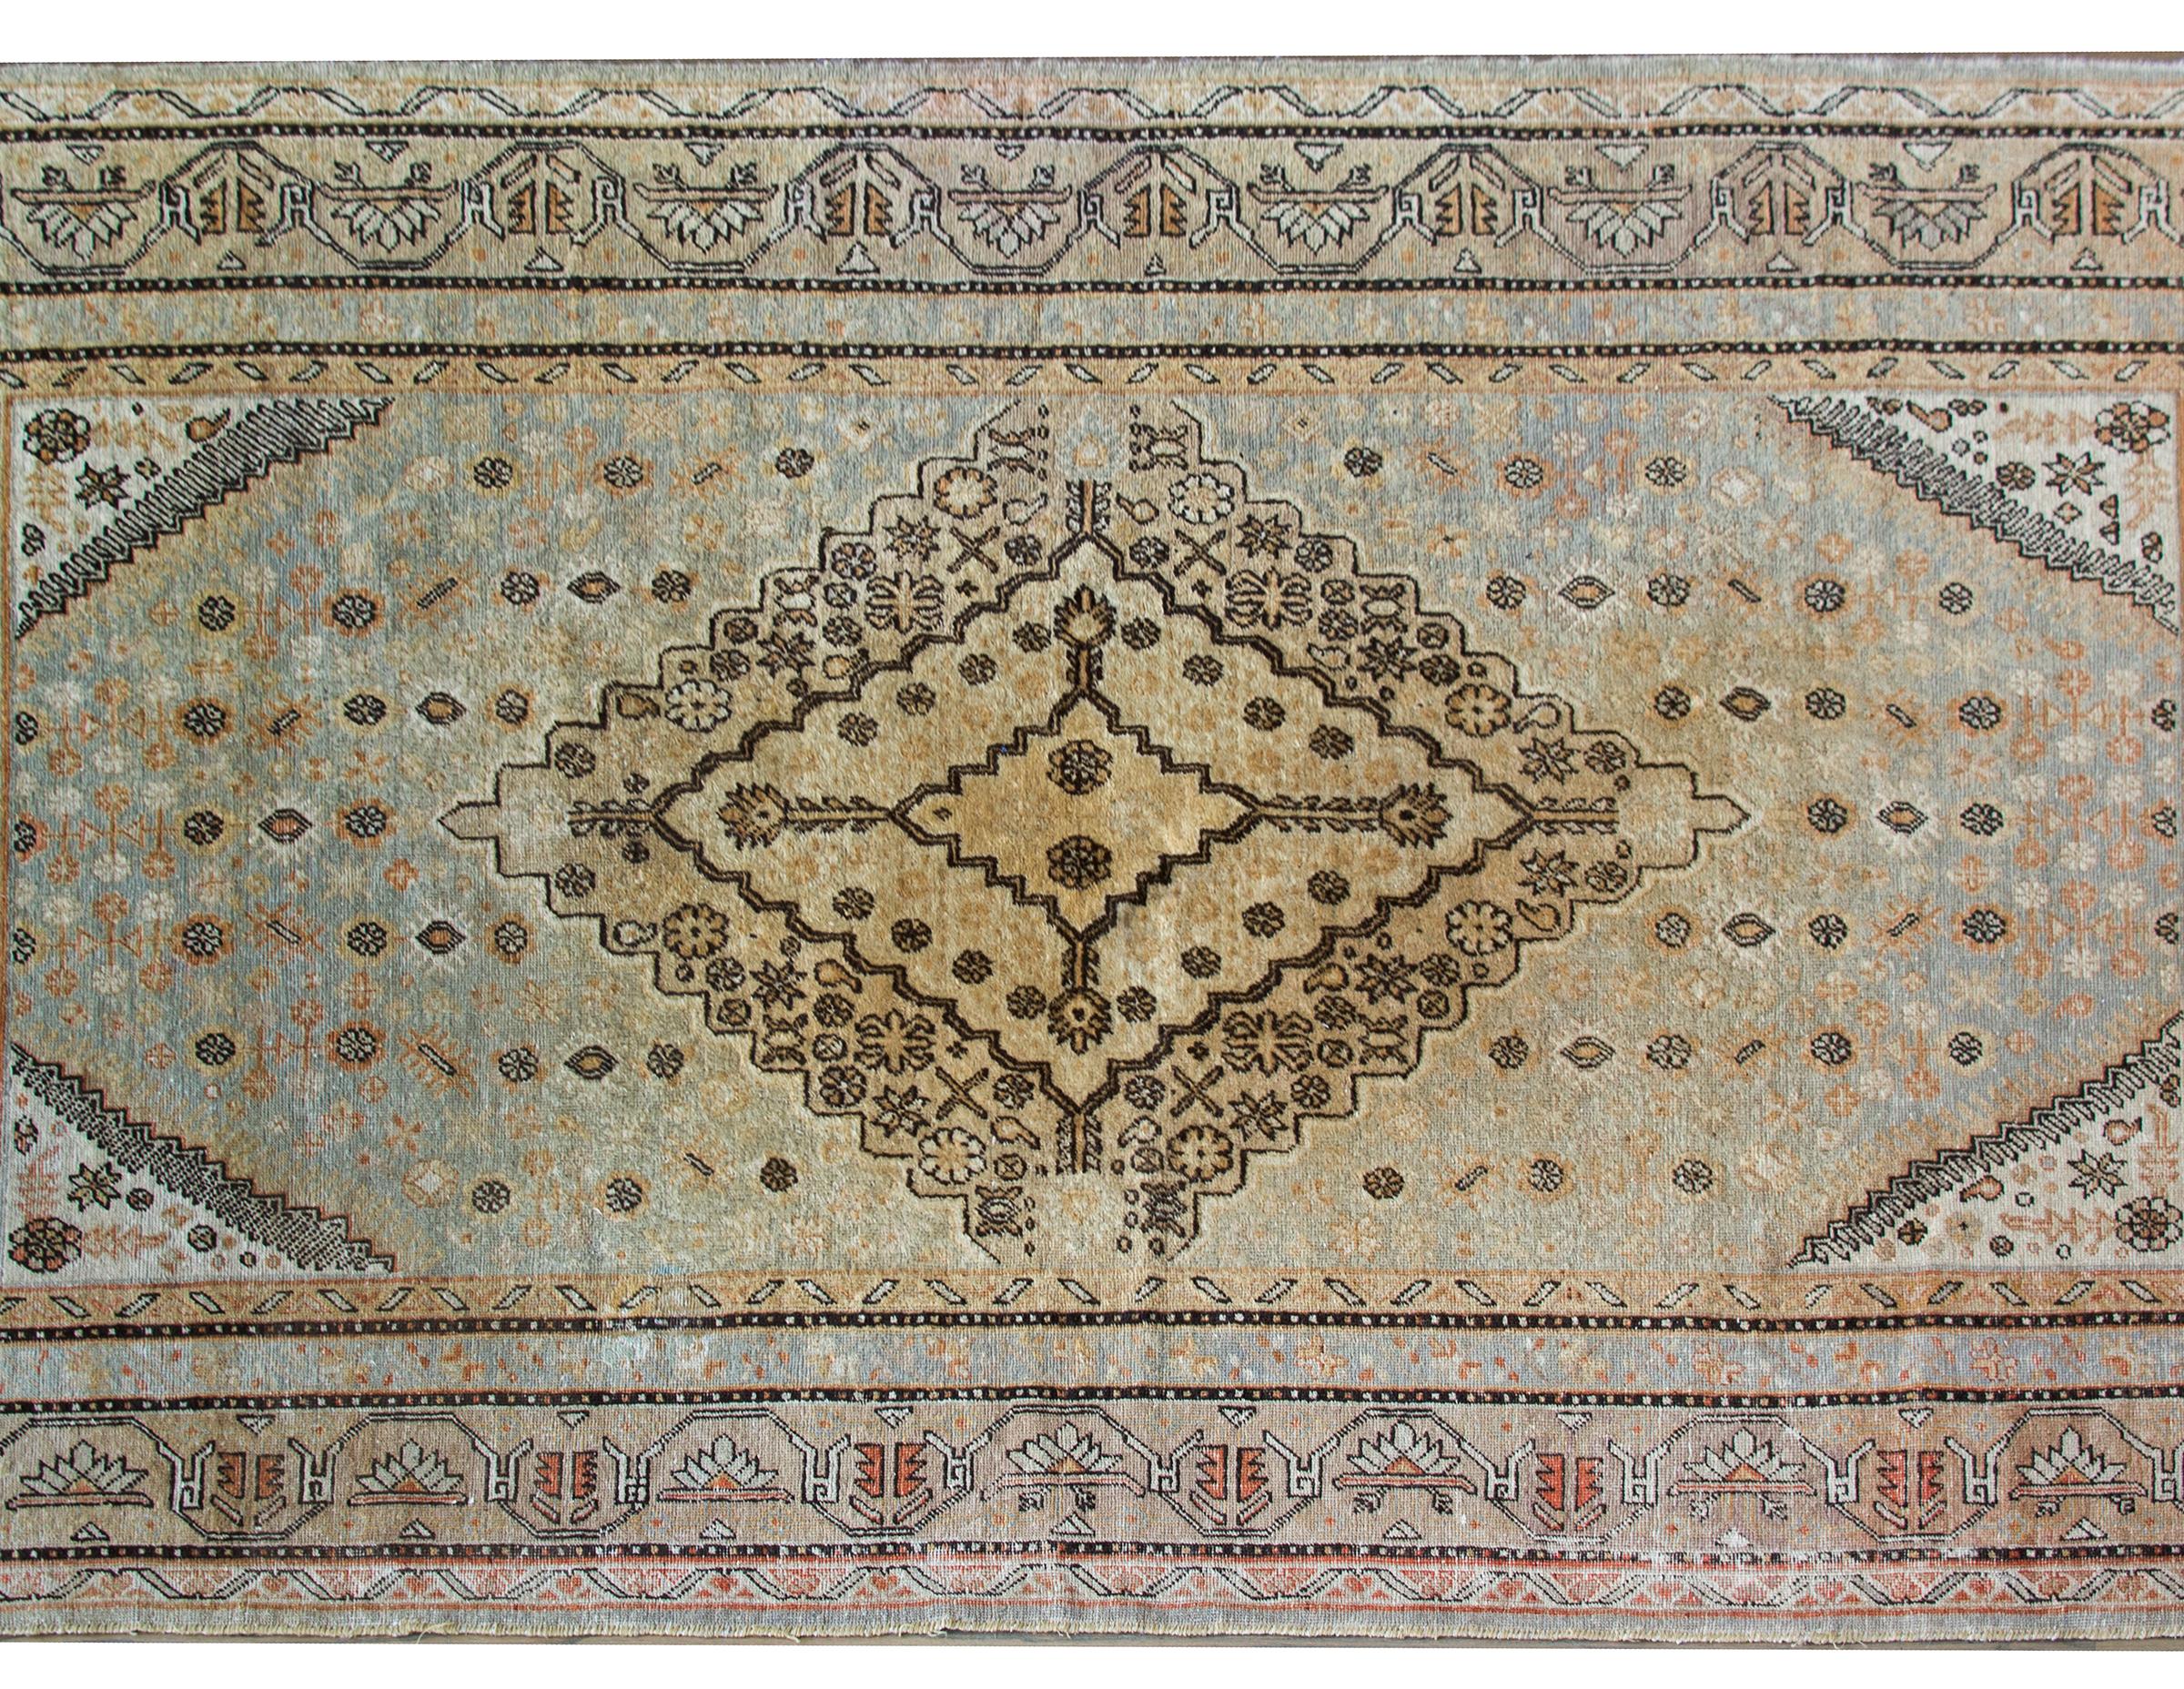 A beautiful early 20th century Central Asian Samarghand rug with a large central diamond medallion with myriad stylized flowers living against a field of more styled flowers, and surrounded by a complex border composed of multiple floral and